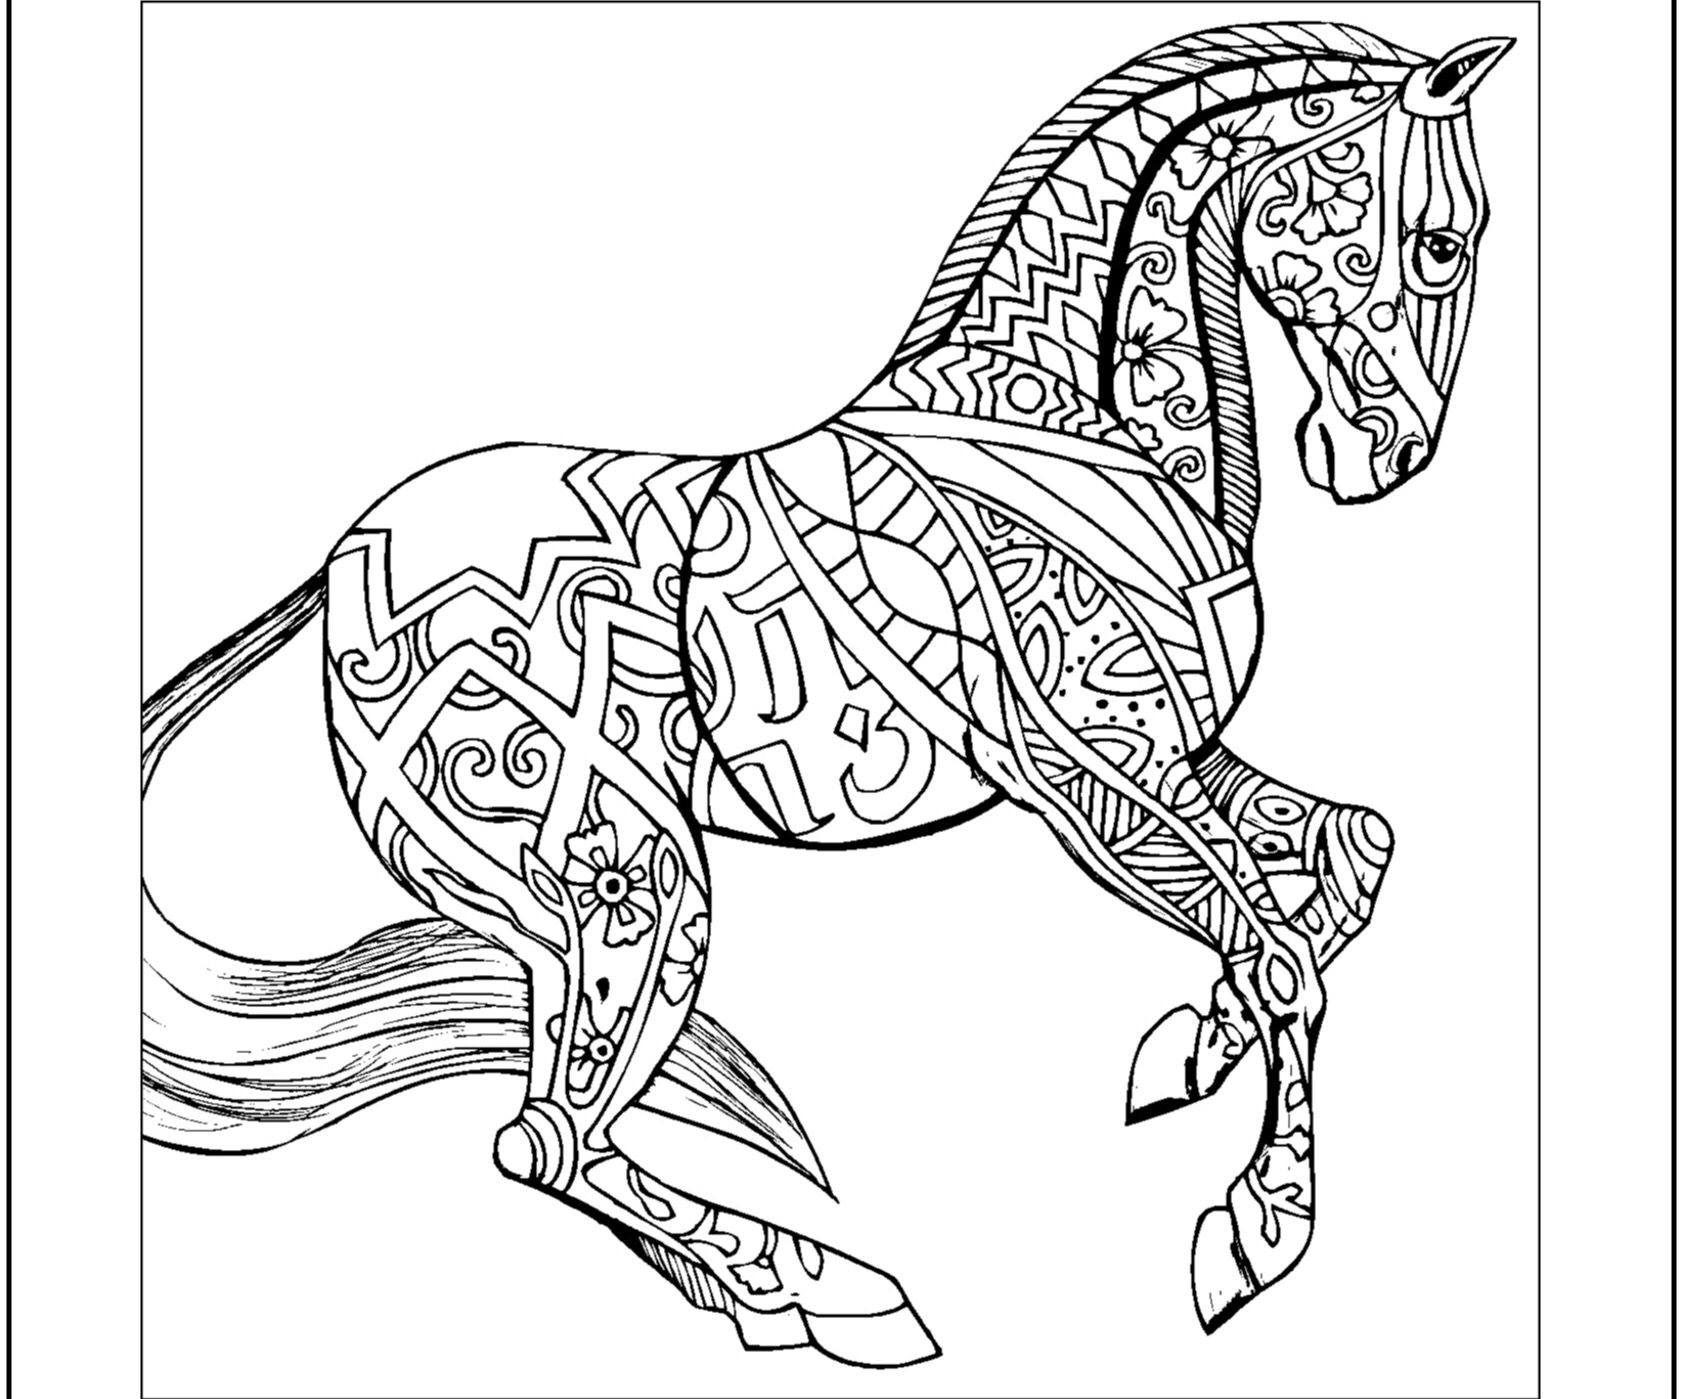 Cute Hard Coloring Pages at GetColorings.com   Free printable colorings ...